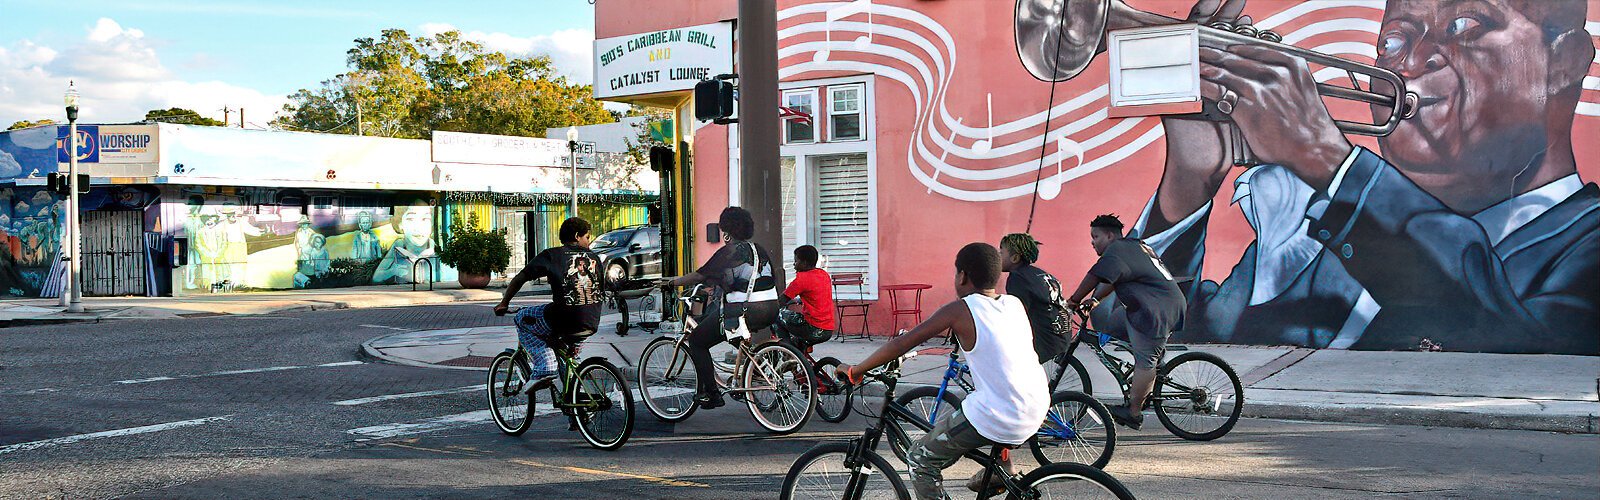 A Black business and residential hub during segregation, St Petersburg’s 22nd Street South corridor, dubbed “The Deuces” after its double 2s, is the focus of revitalization efforts by the nonprofit organization Deuces Live. 